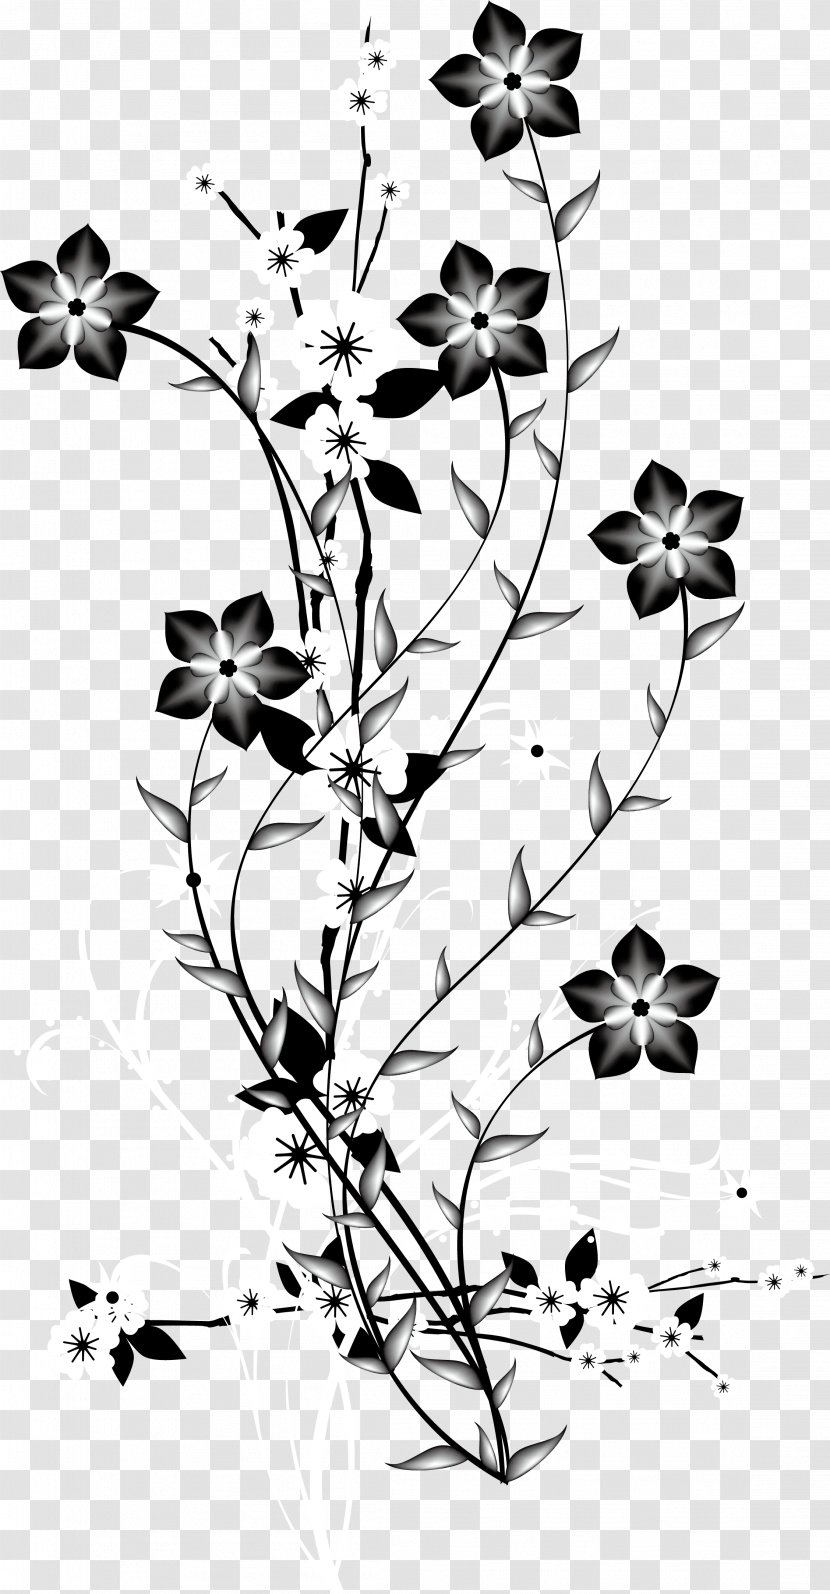 China Japan Flower Euclidean Vector - Black And White Decorative Background Flowers Branch Transparent PNG